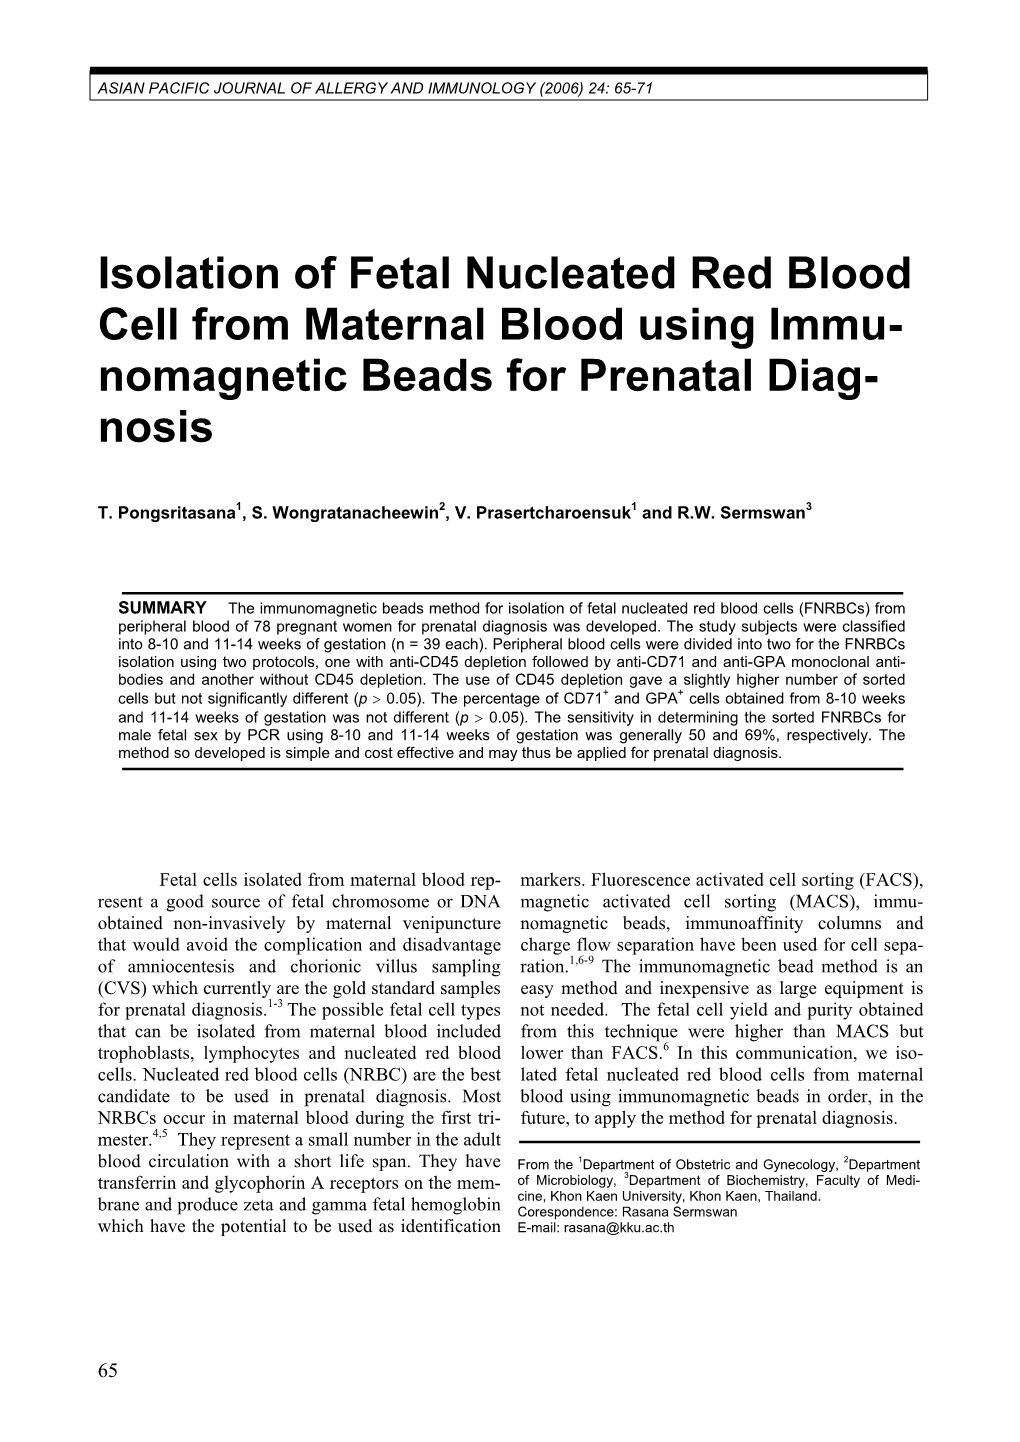 Isolation of Fetal Nucleated Red Blood Cell from Maternal Blood Using Immu- Nomagnetic Beads for Prenatal Diag- Nosis